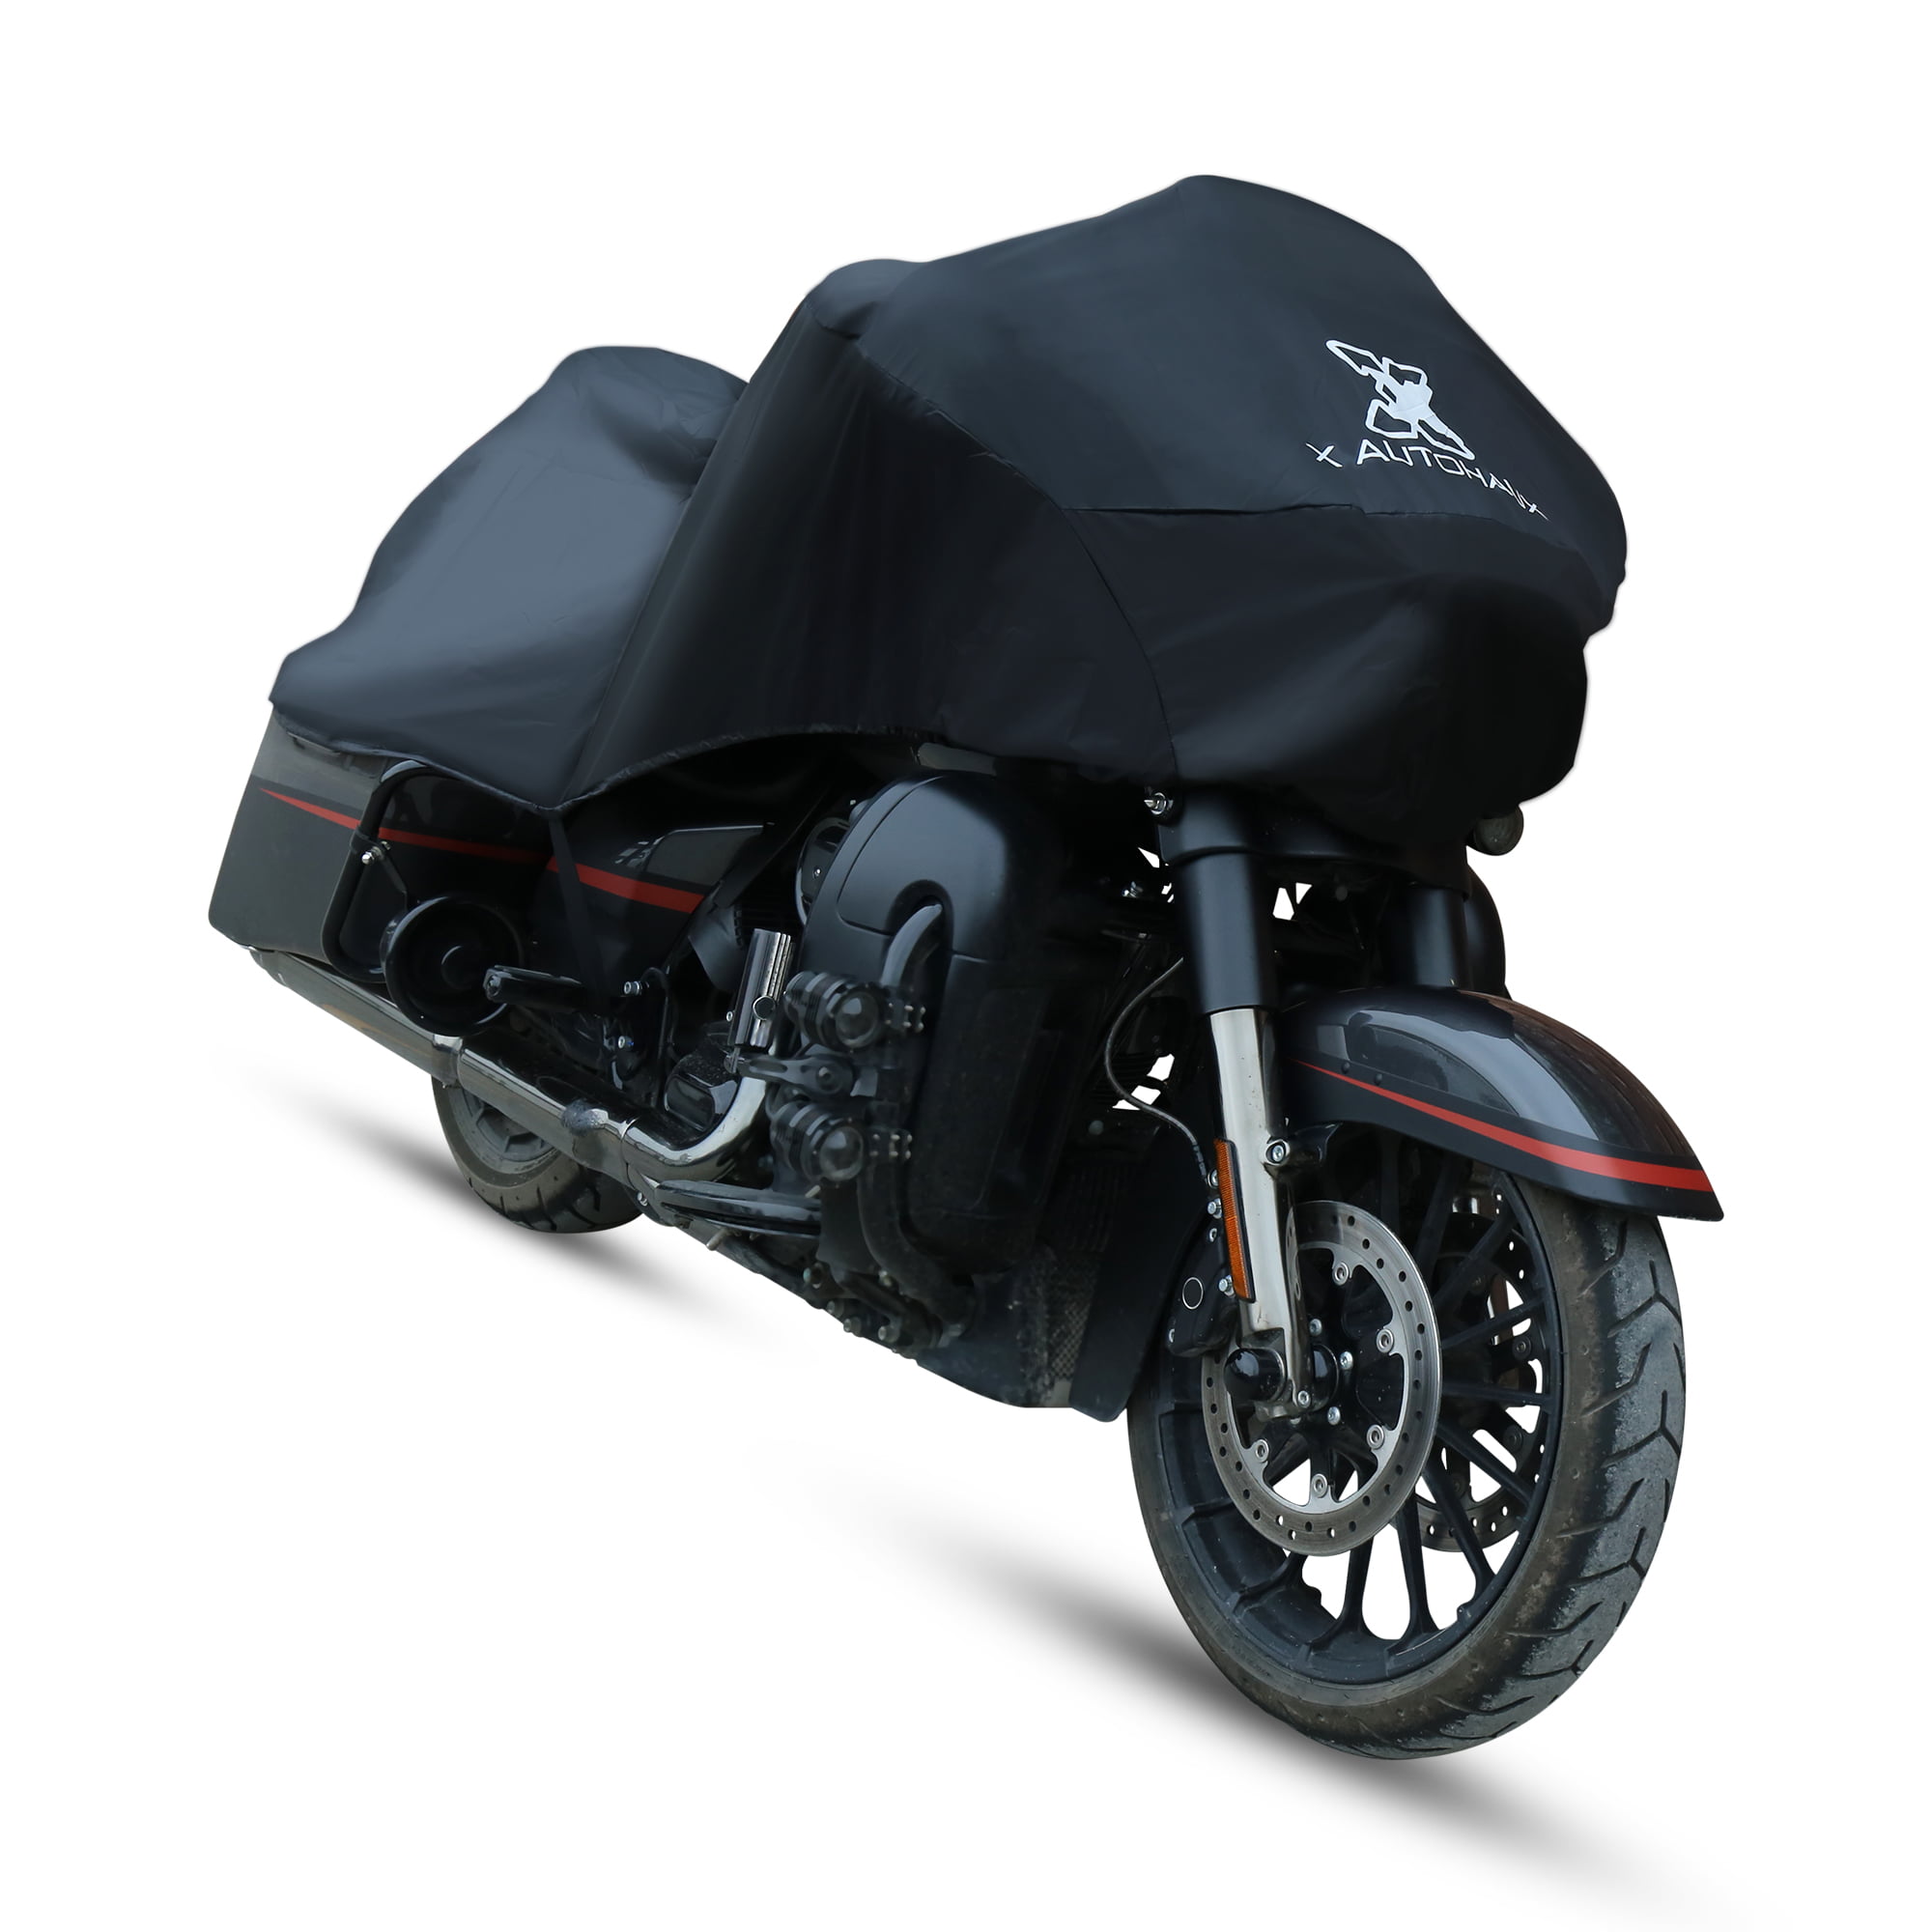 XXL Waterproof Motorcycle Cover For Harley Davidson Dyna Softail Iron XL 883 US